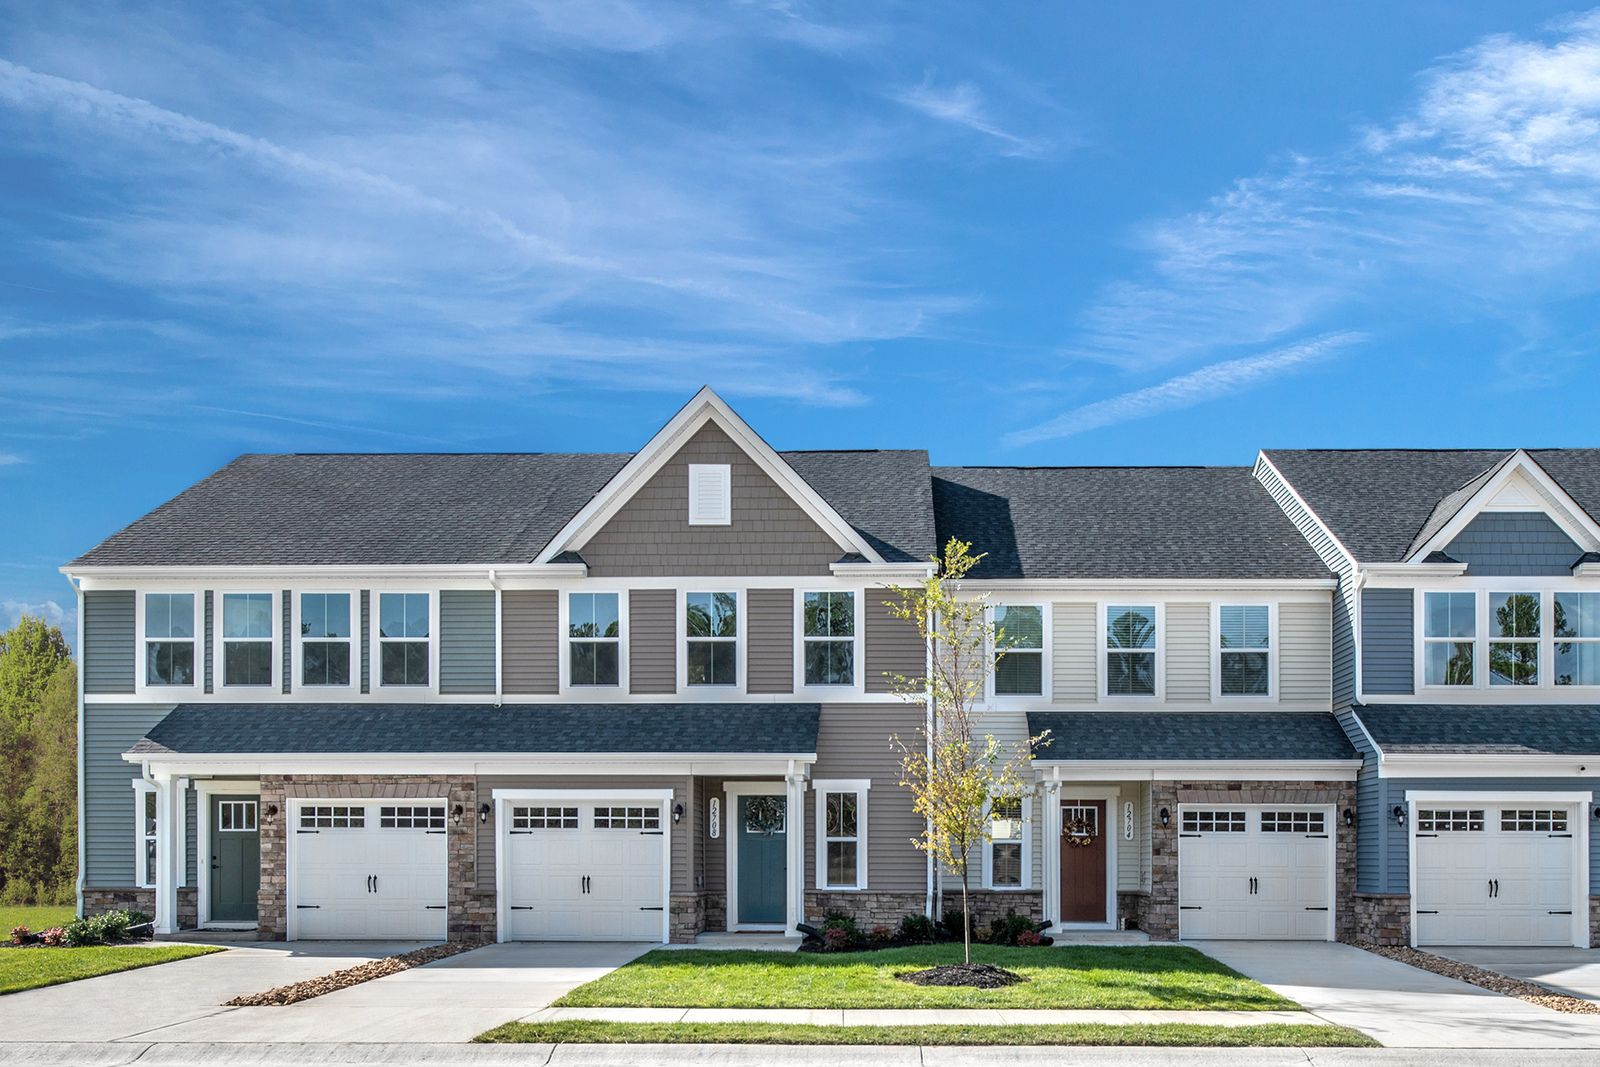 come see why so many have already made Meadow Run Towns their new home!